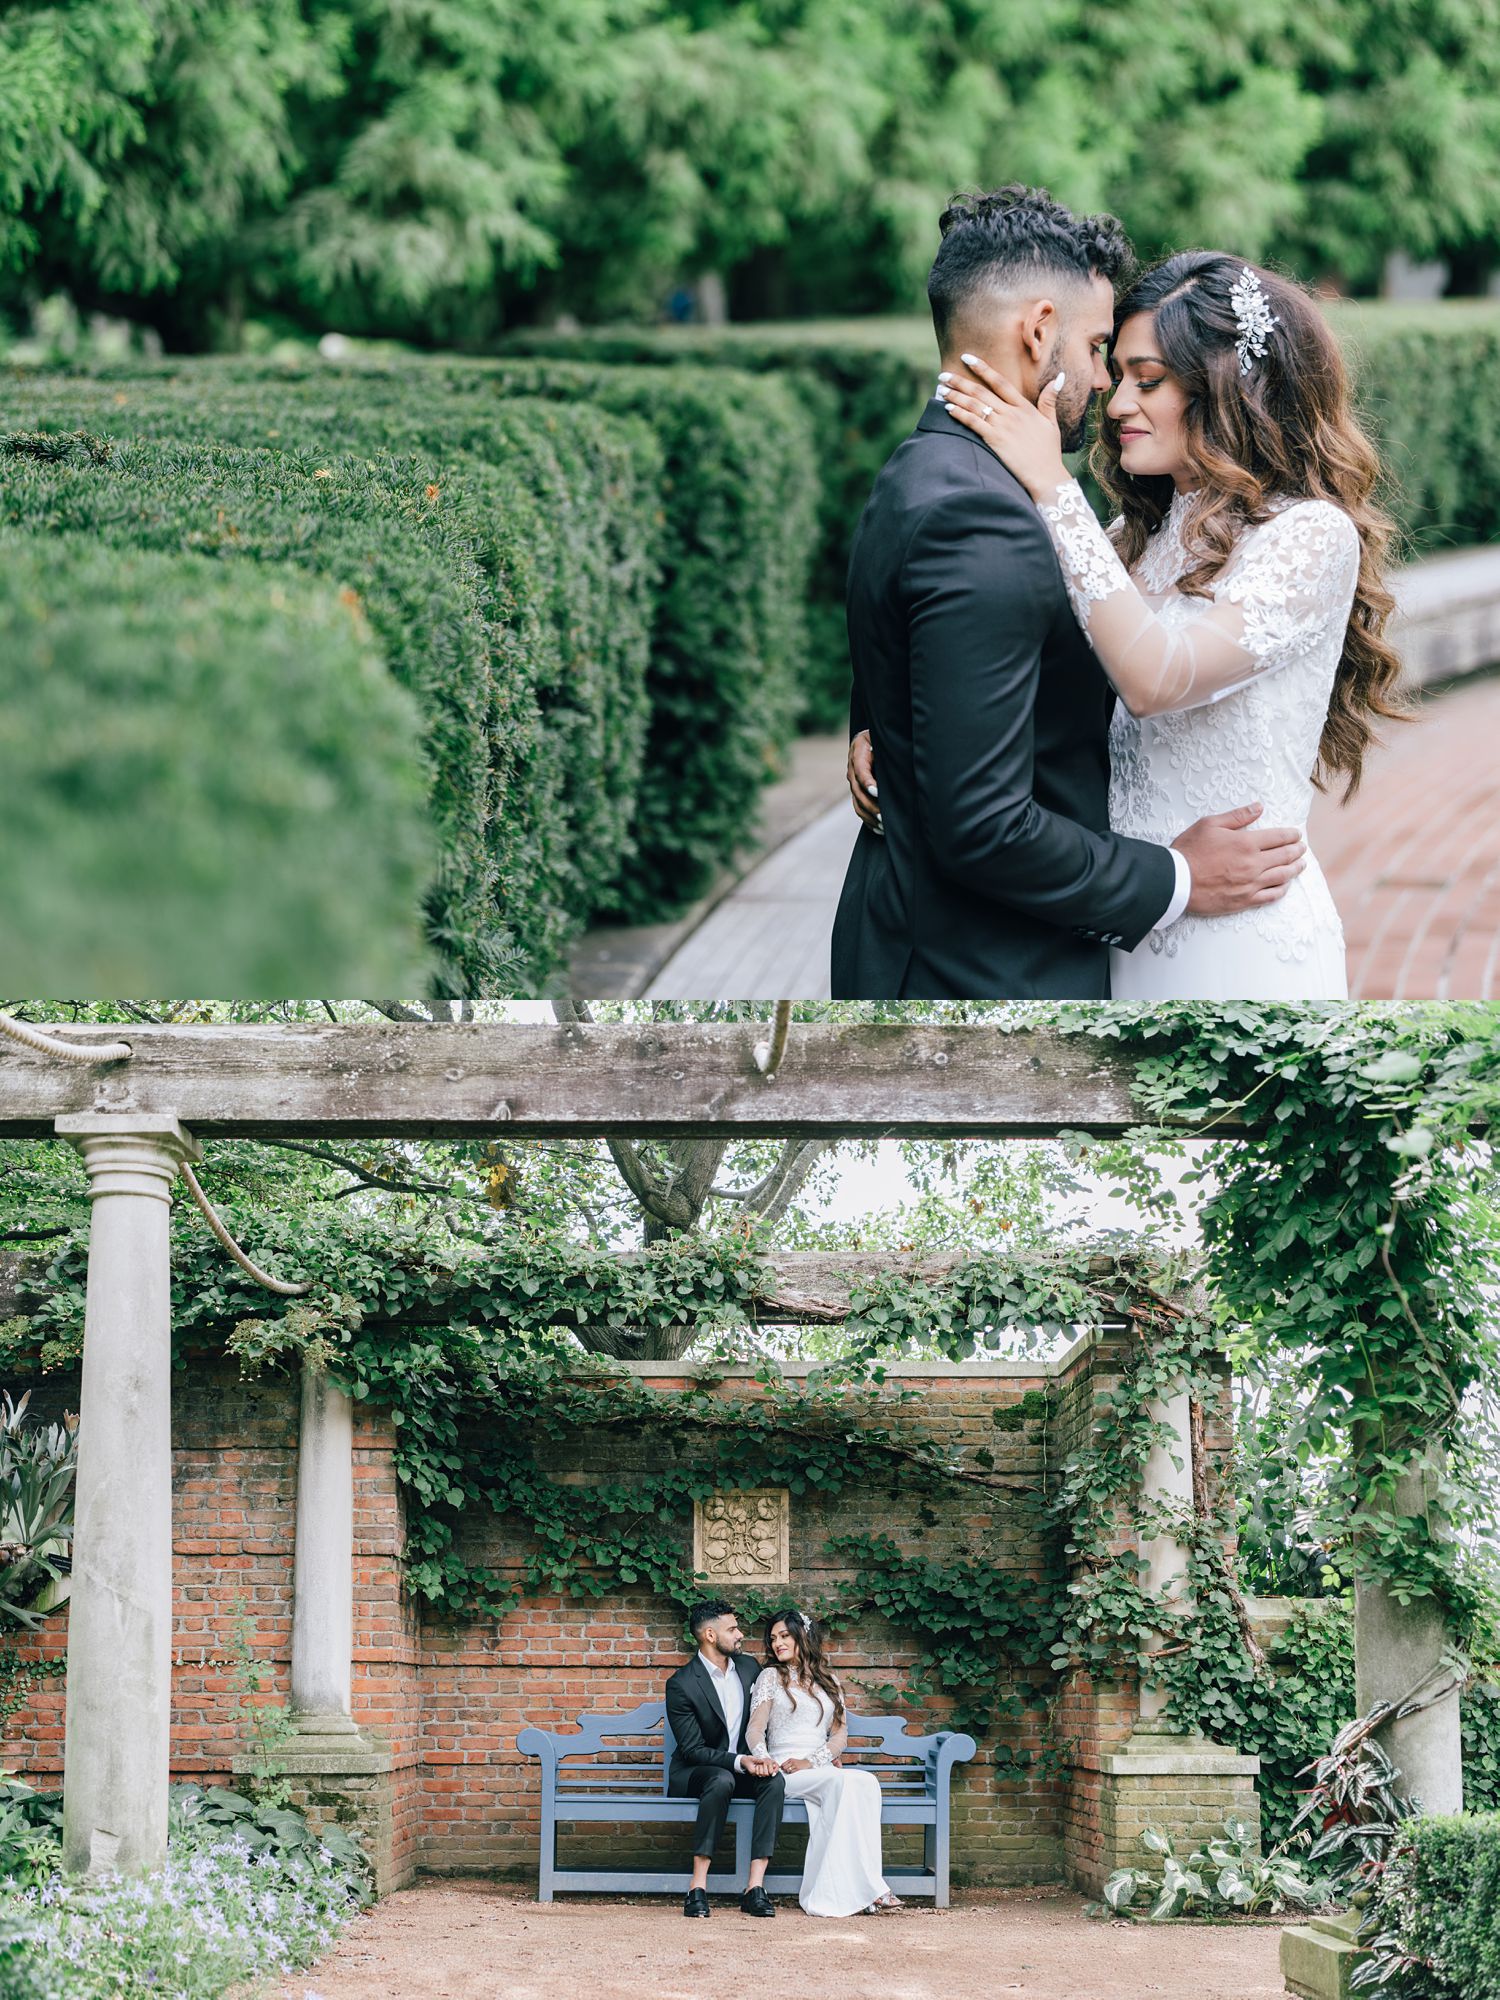 Candid wedding pose at Chicago Garden photographed by Maha Studios